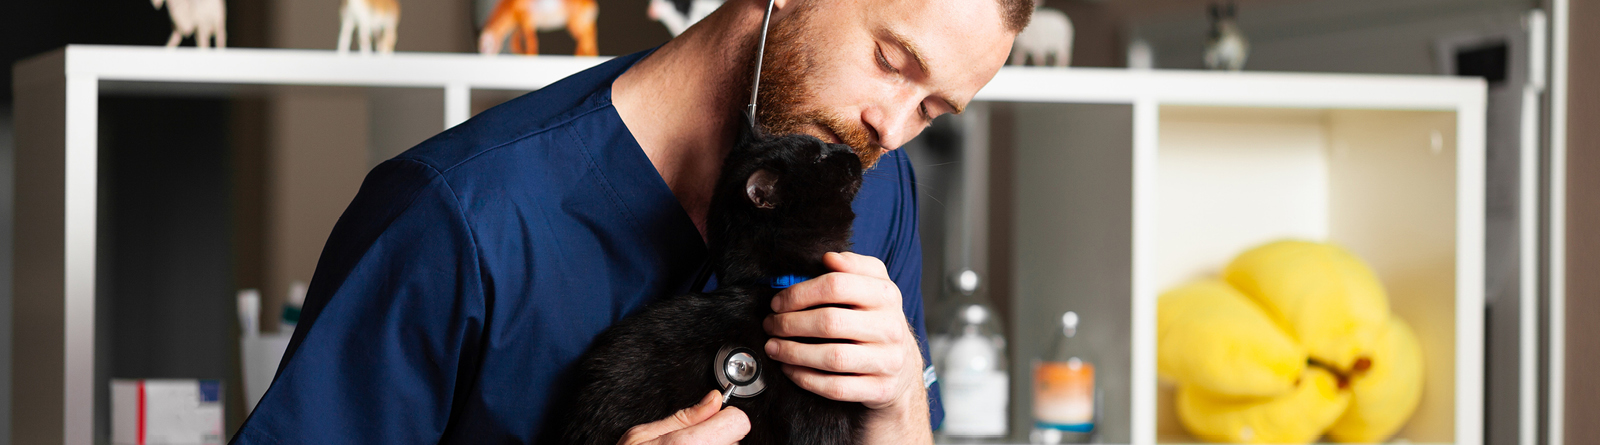 Veterinarian listening to a cat with a stethoscope